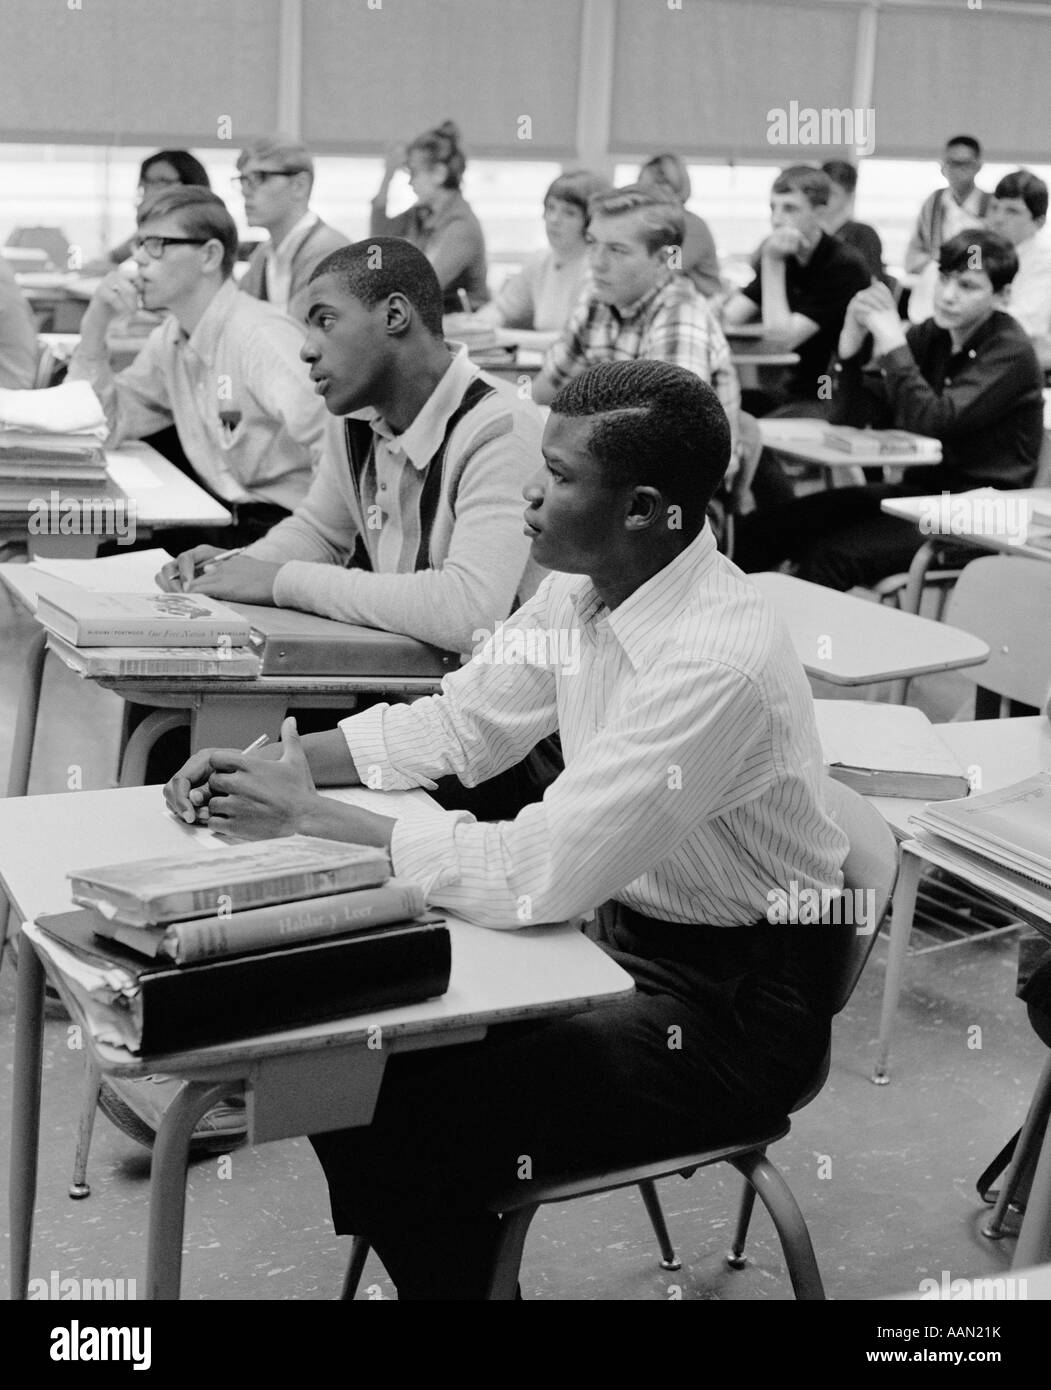 1960s TEEN BOYS GIRLS RACIAL ETHNIC MIX STUDENTS SIT AT DESKS HIGH SCHOOL CLASSROOM STUDY LEARNING EDUCATION EQUAL OPPORTUNITY Stock Photo